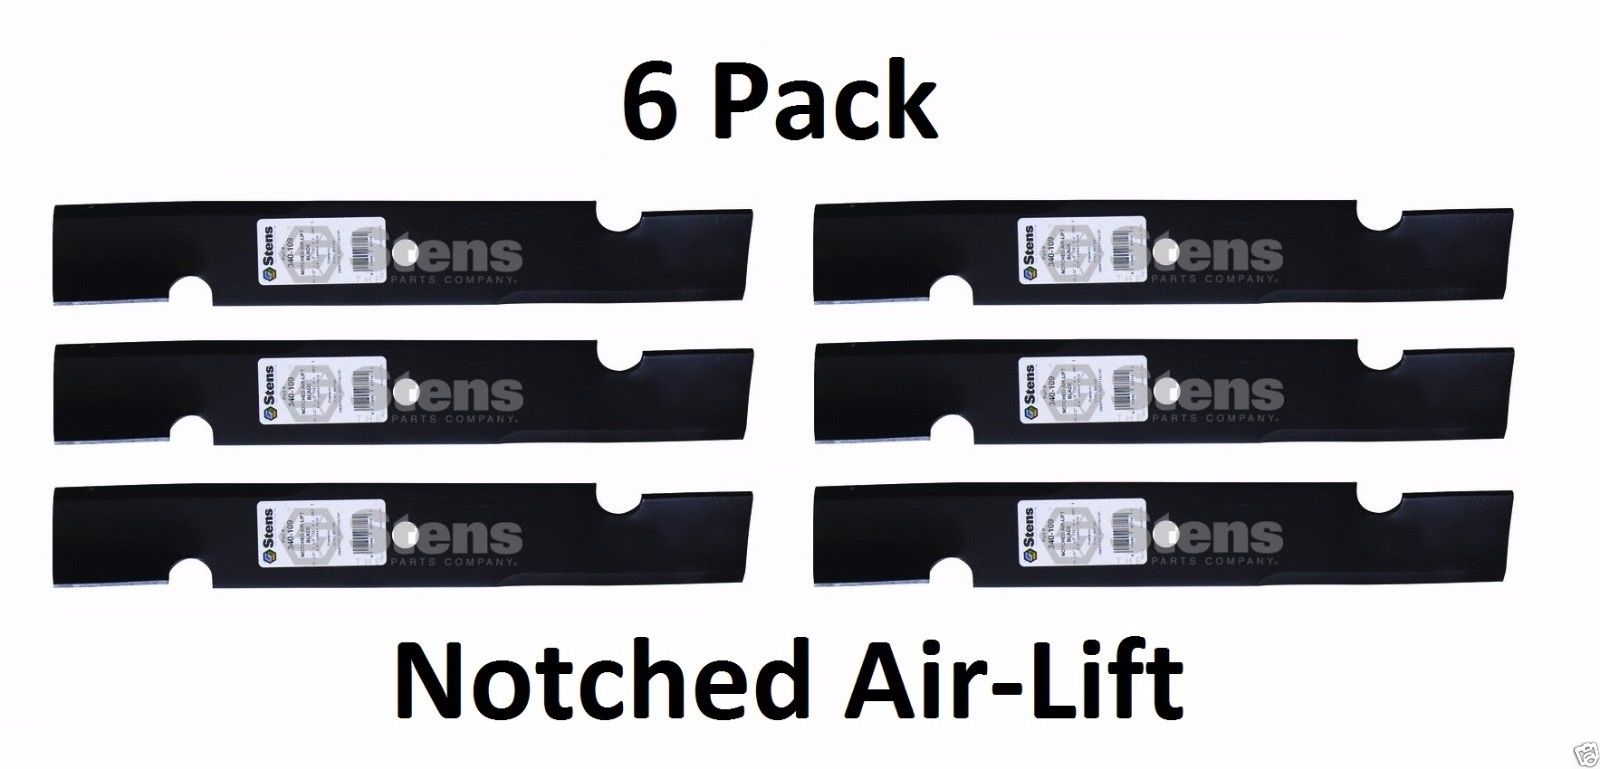 6 Pack Stens 340-109 Notched Air-Lift Blade for Scag 48110 481706 482462 482877